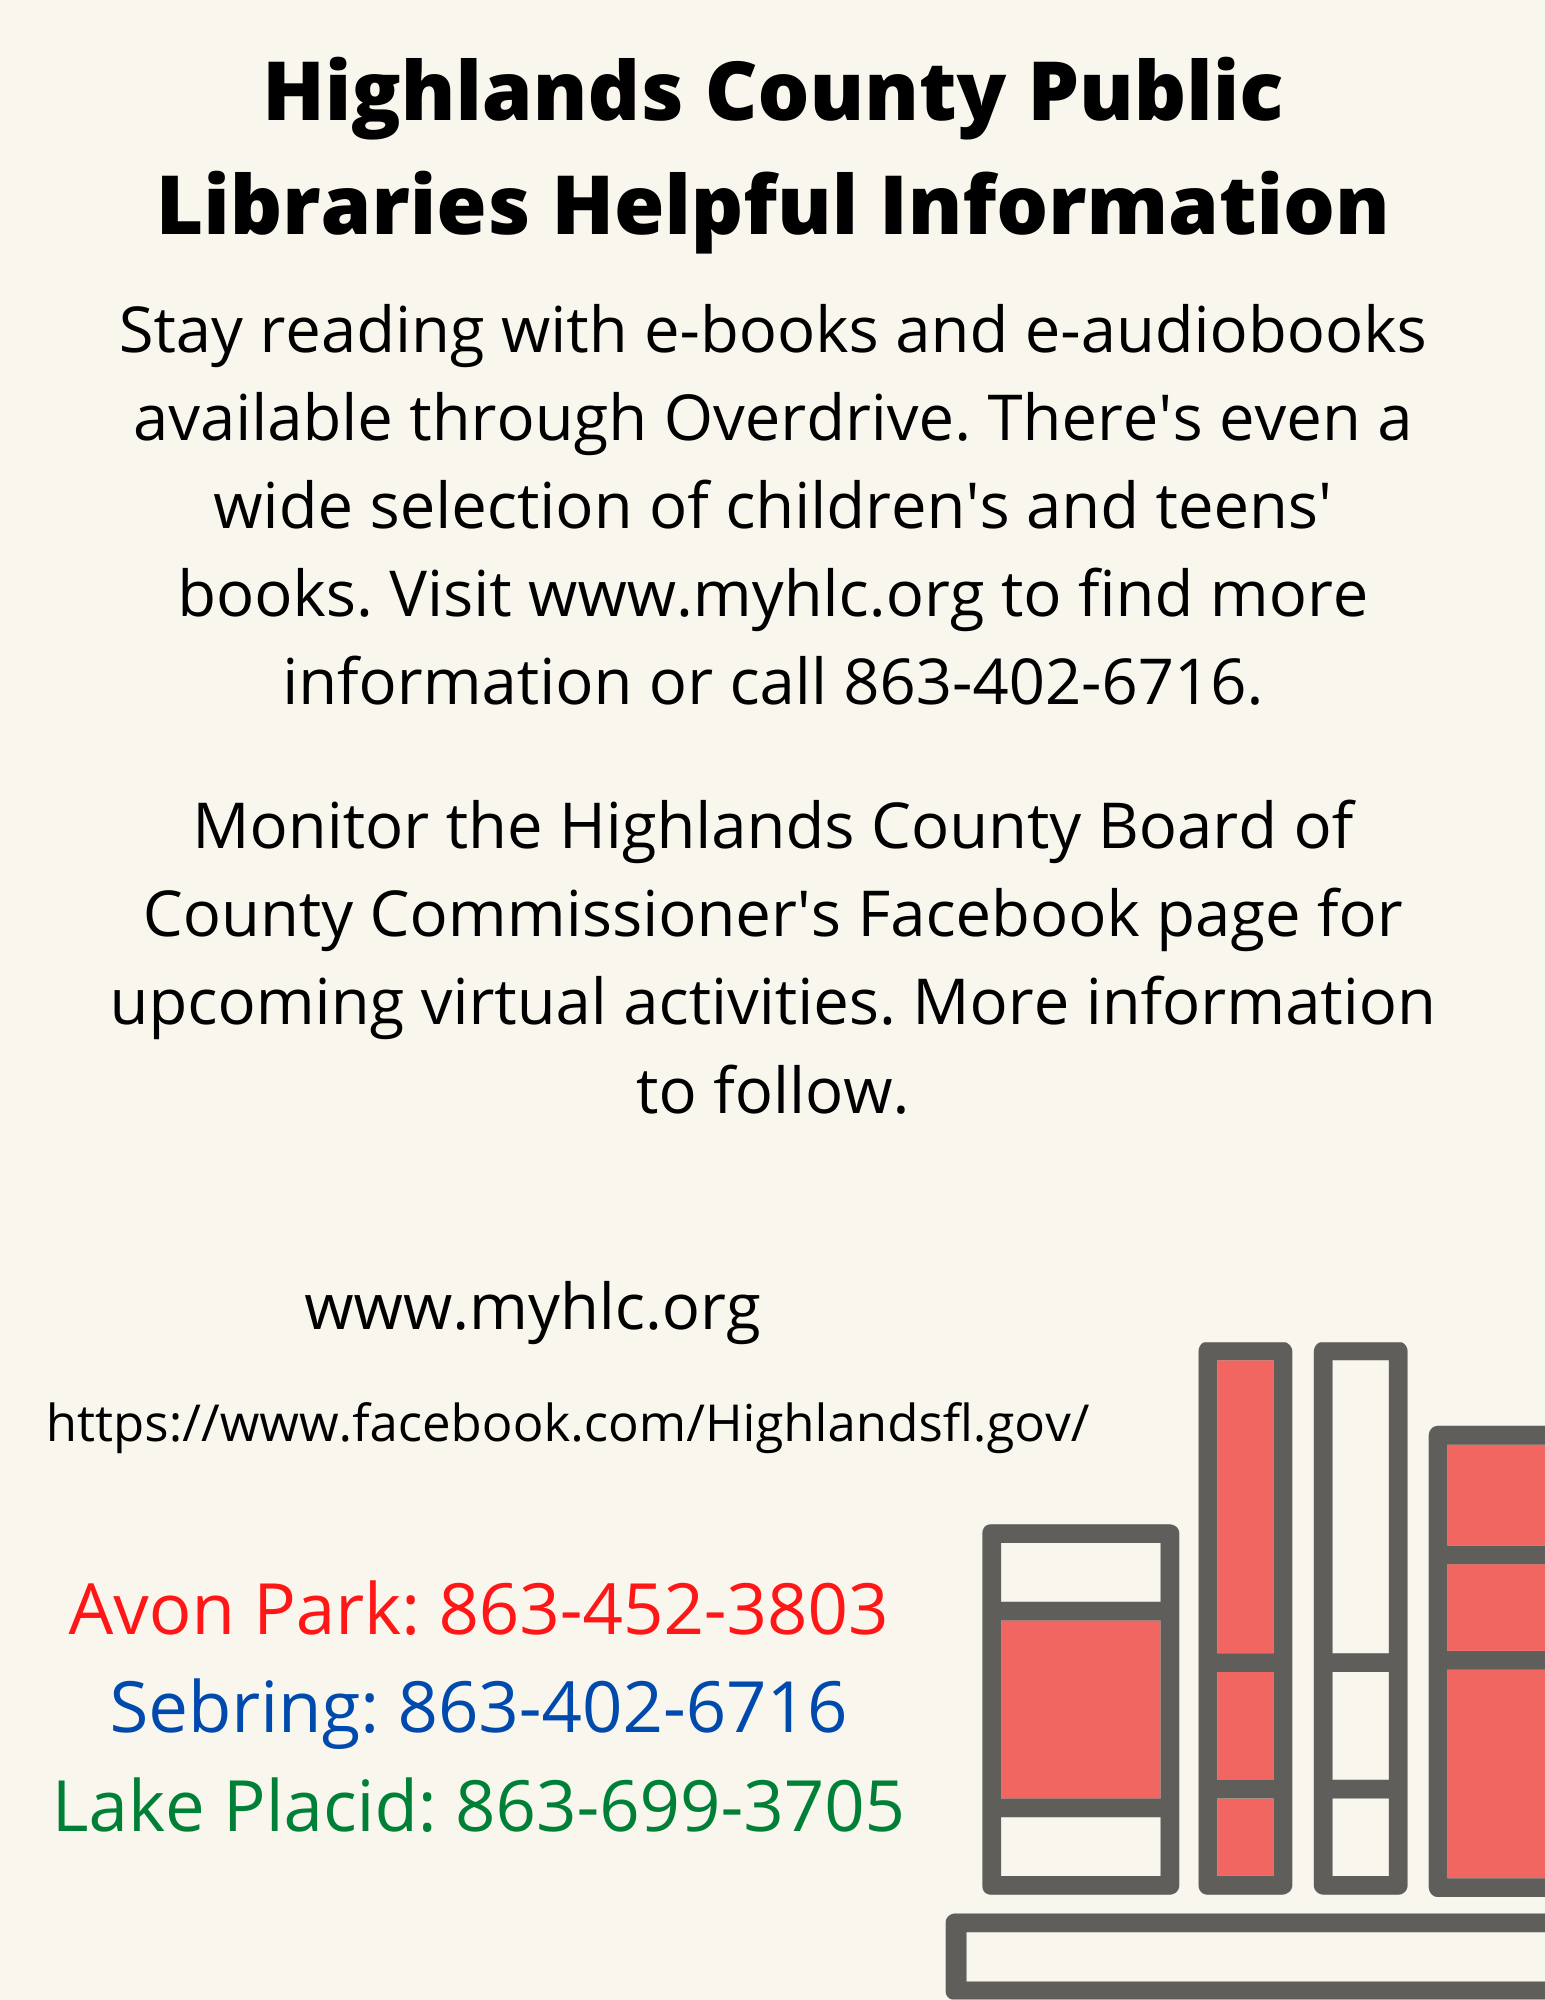 Highlands County patrons, please read for information regarding Highlands County libraries. For more information, call 863-402-6716. We are available to answer your questions, renew materials, and assistance accessing e-resources.